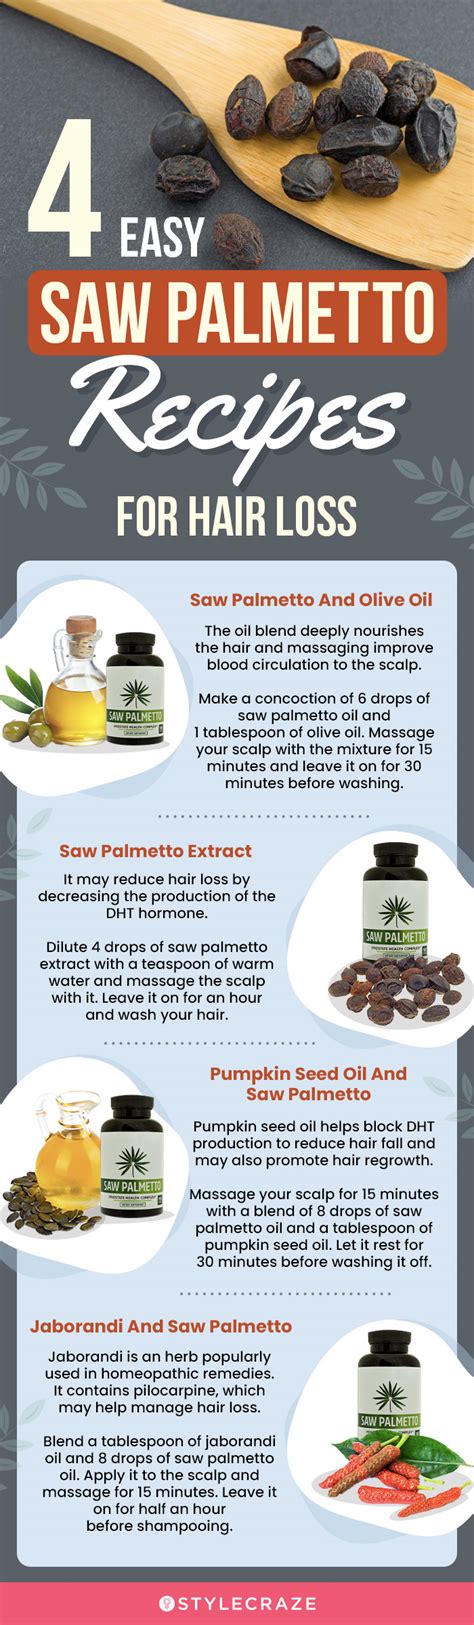 Saw Palmetto For Hair Loss Side Effects And Precautions